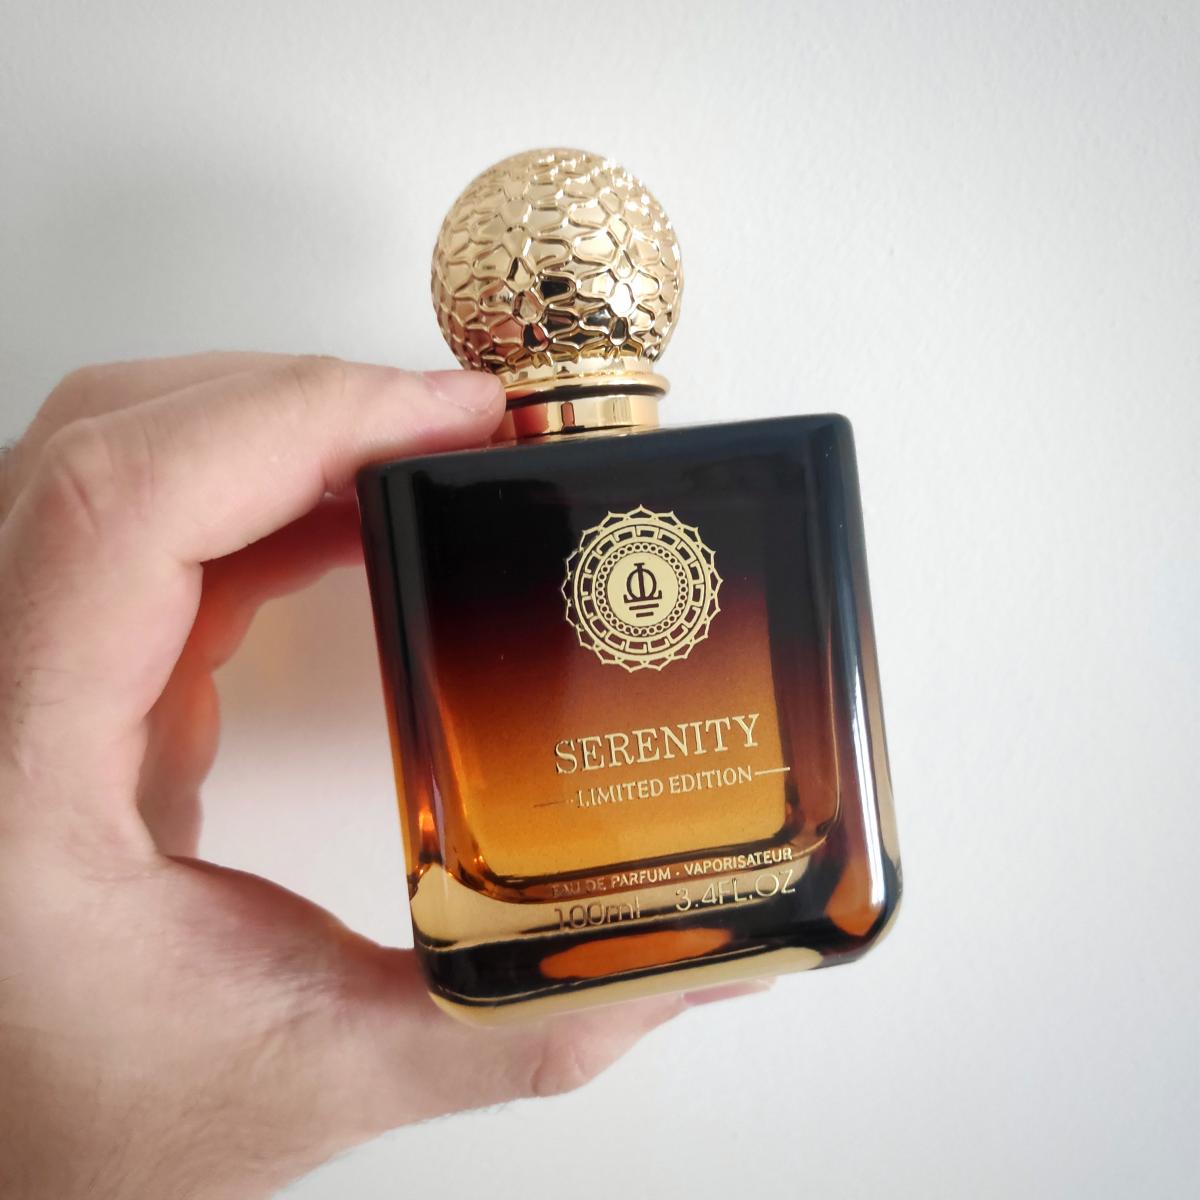 Serenity Omanluxury perfume - a fragrance for women and men 2020